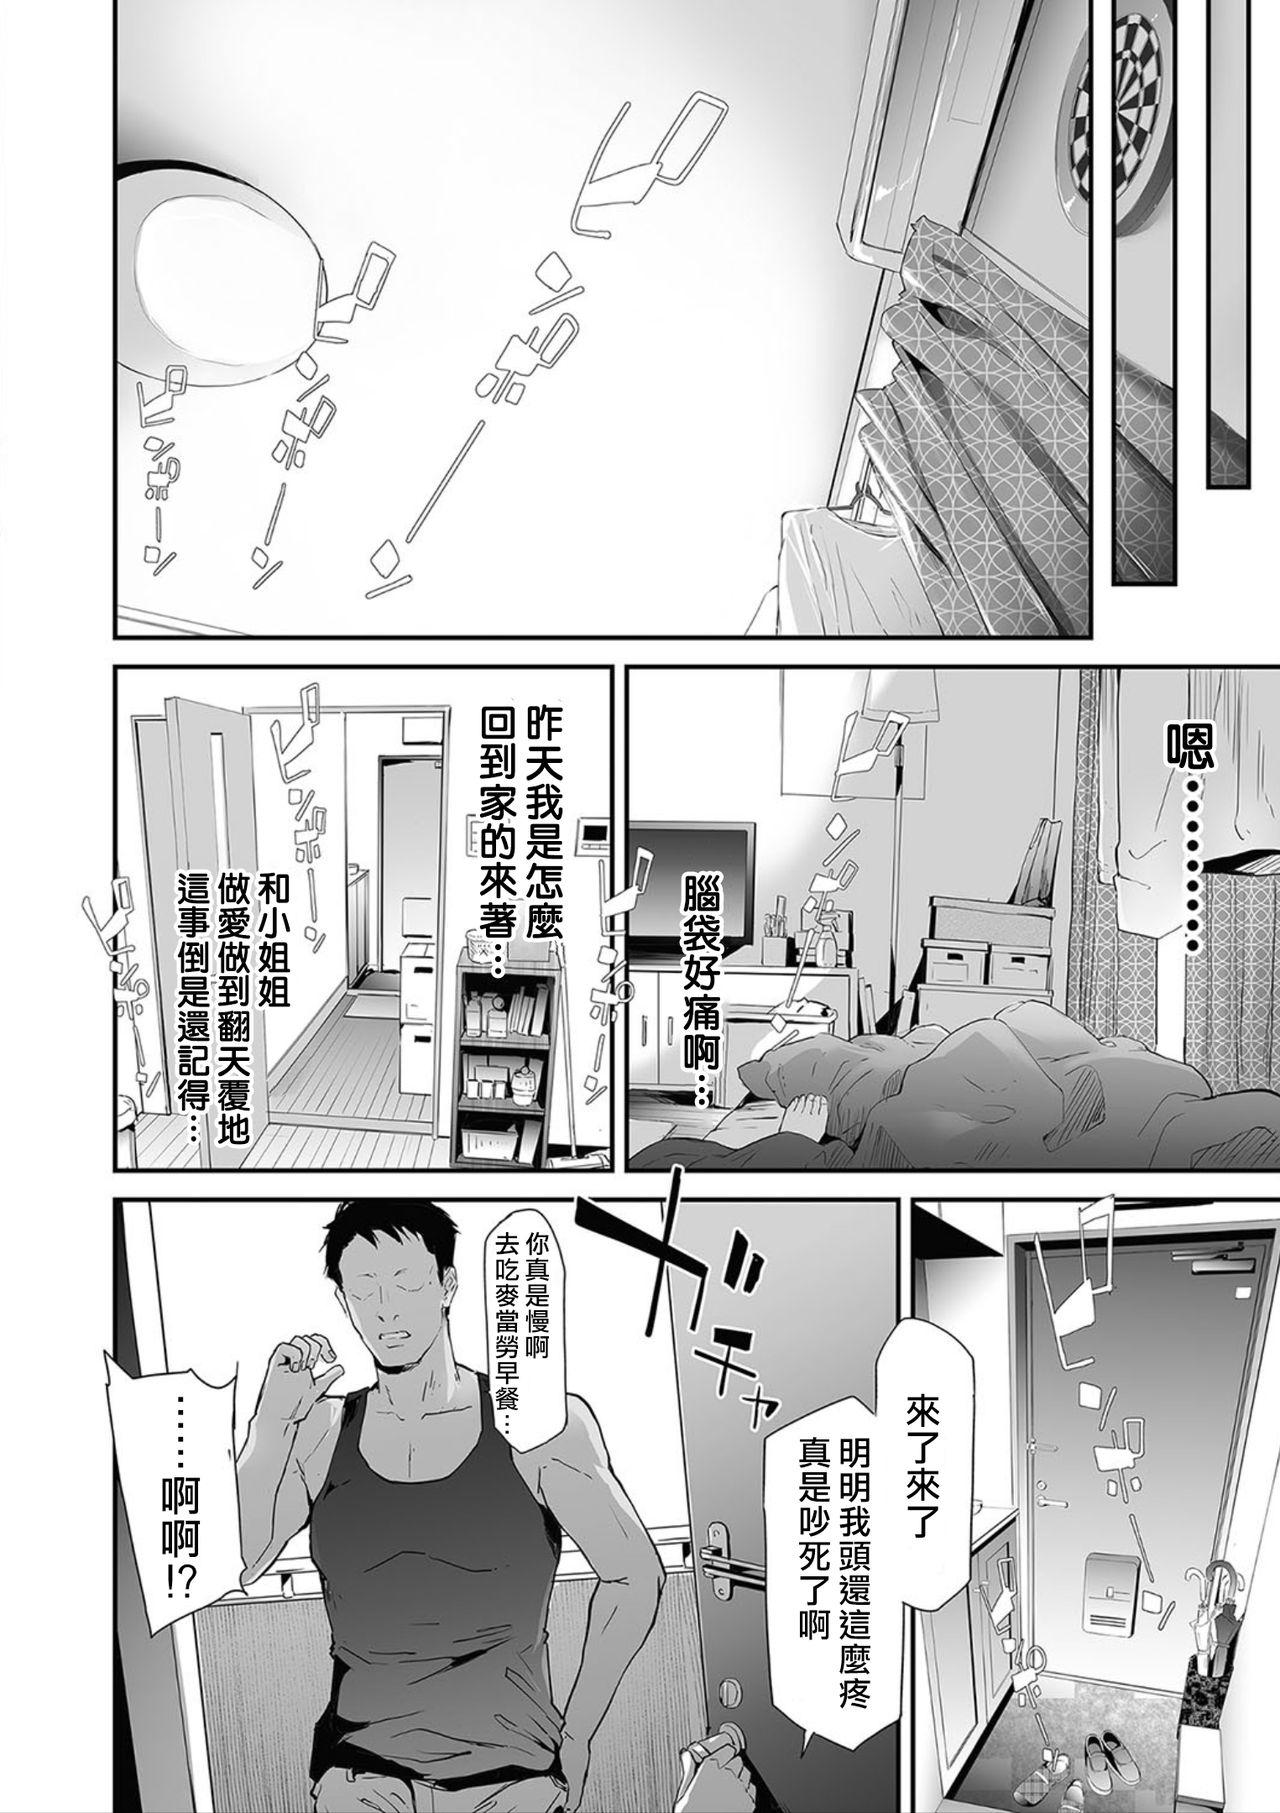 Chichona TS☆Revolution＜Ch.1＞ Audition - Page 6